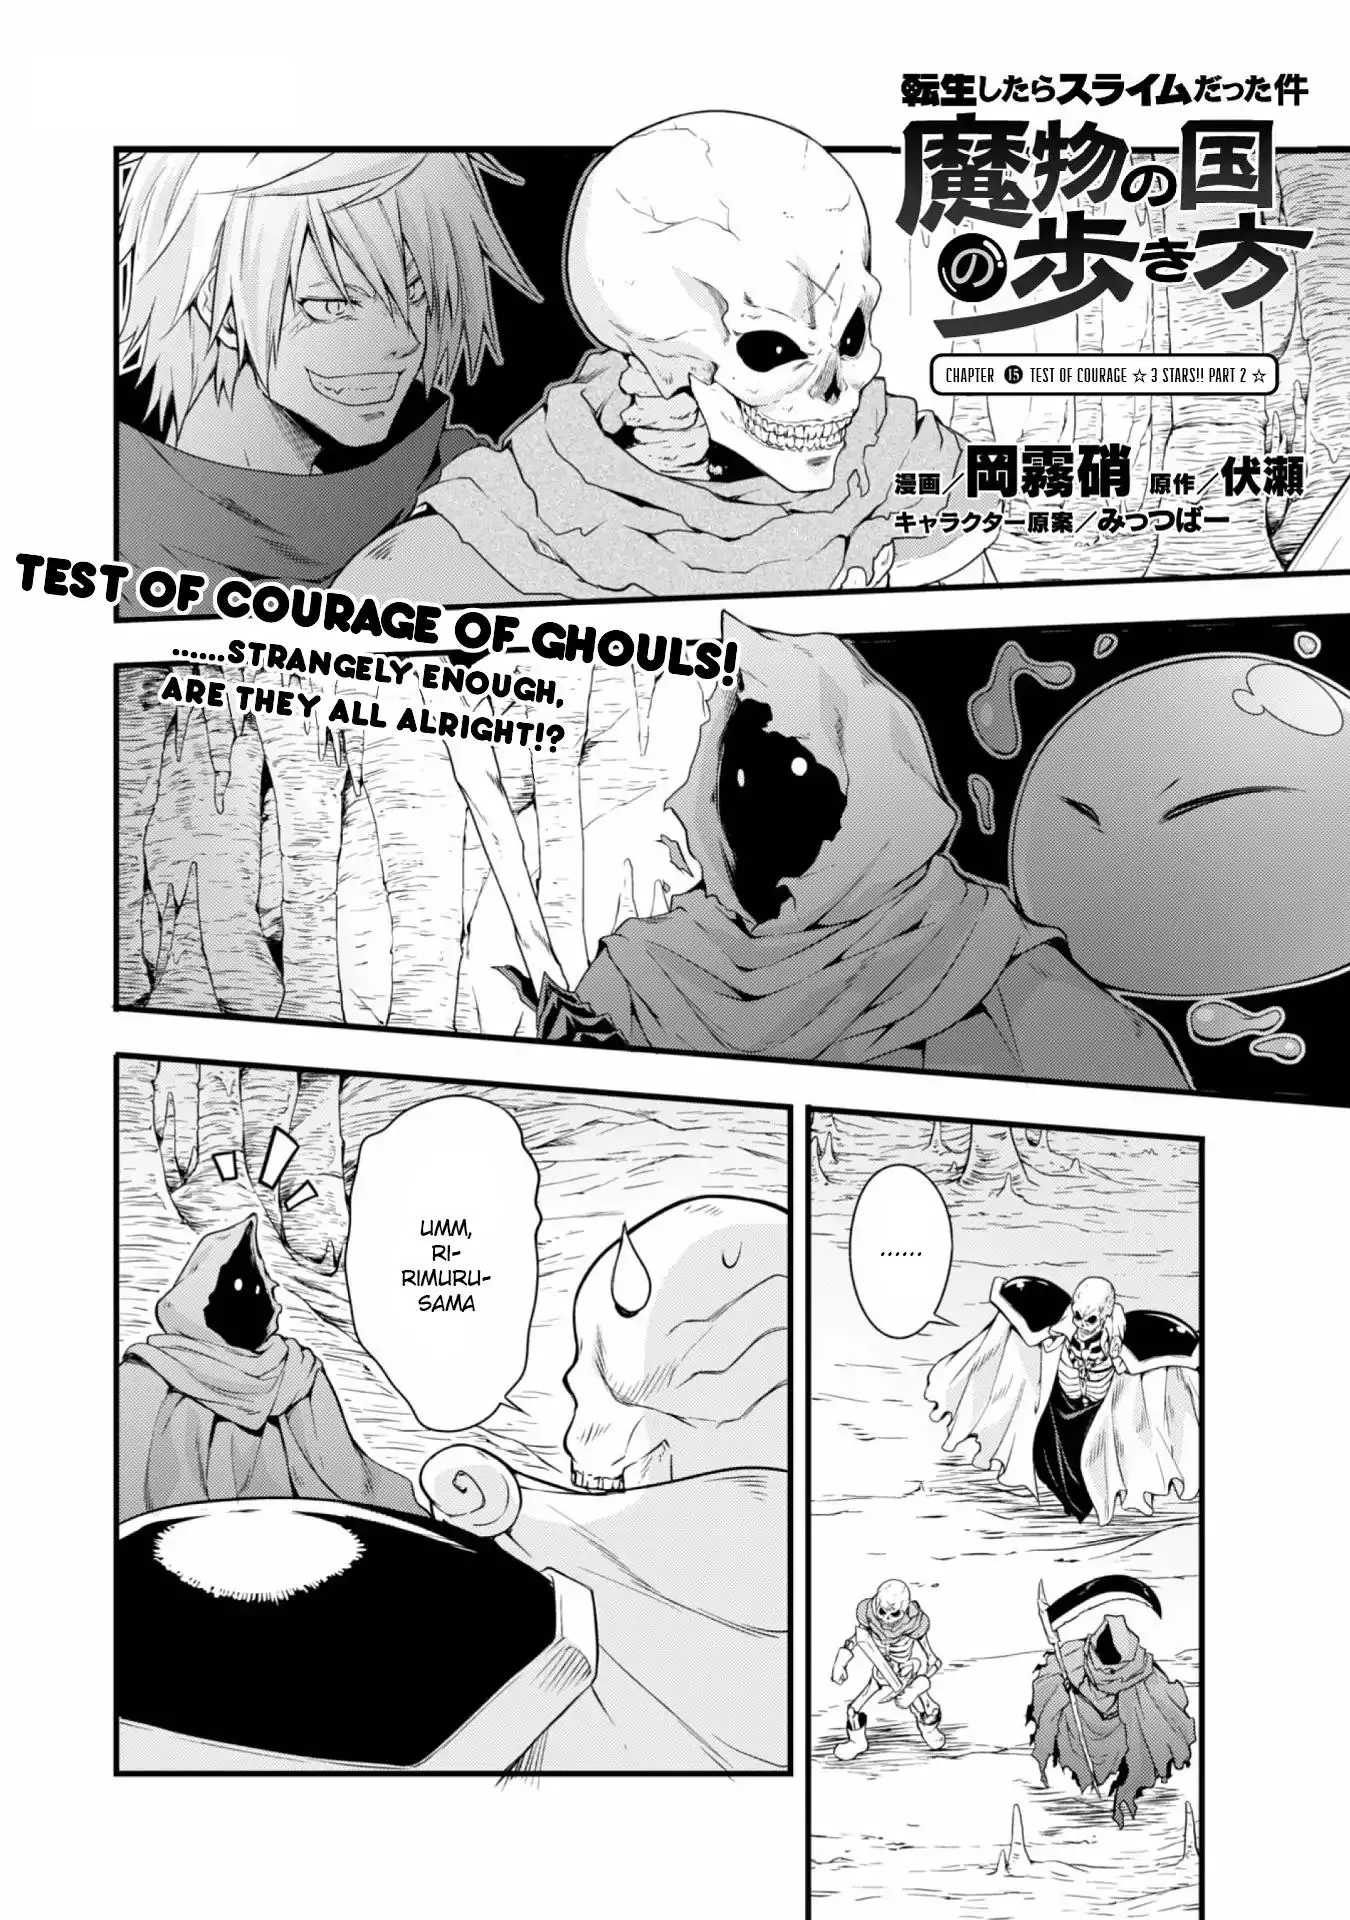 Tensei Shitara Slime Datta Ken: The Ways of Strolling in the Demon Country - 15 page 1